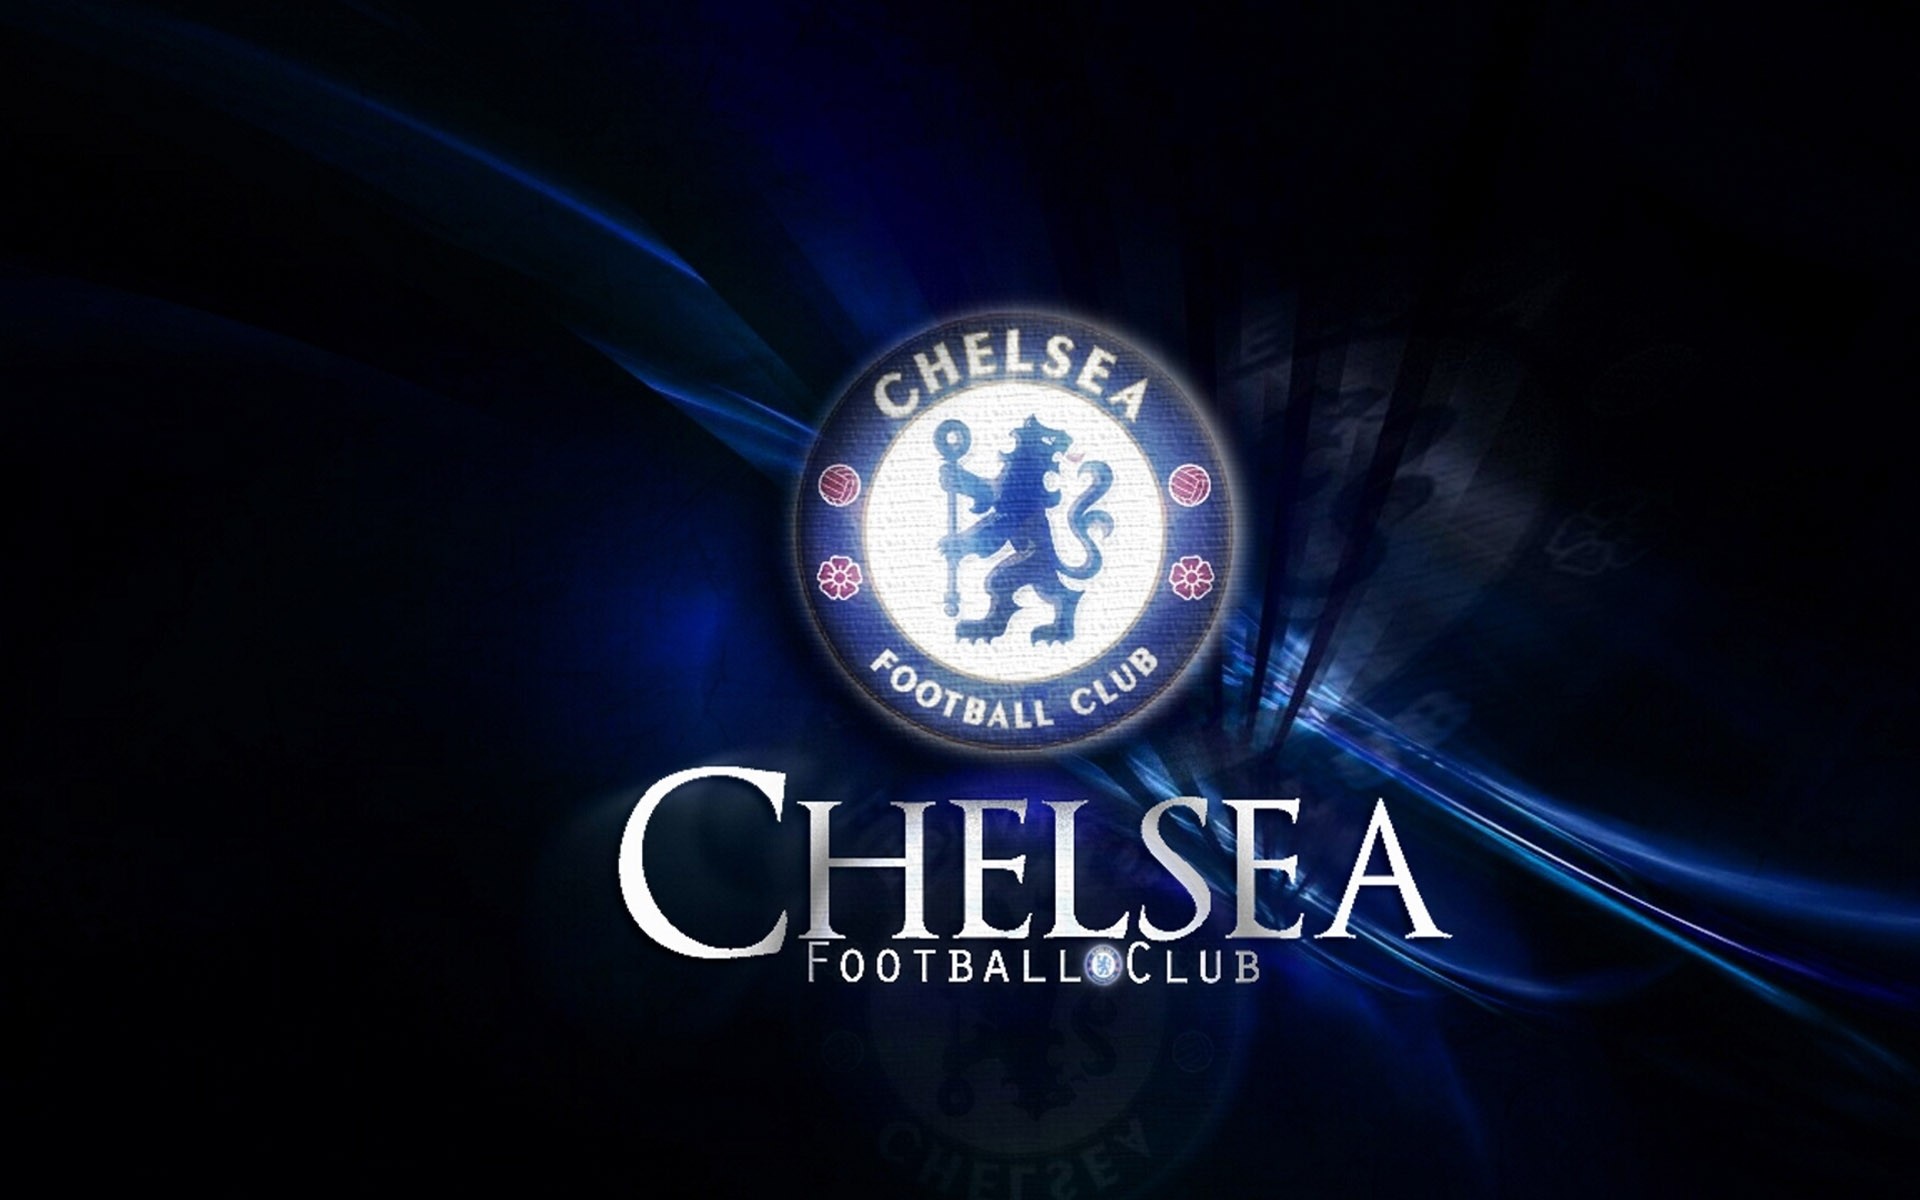 1920x1200 Chelsea vs West Ham United Live Telecast in India, IST Time, TV info 9/12/17